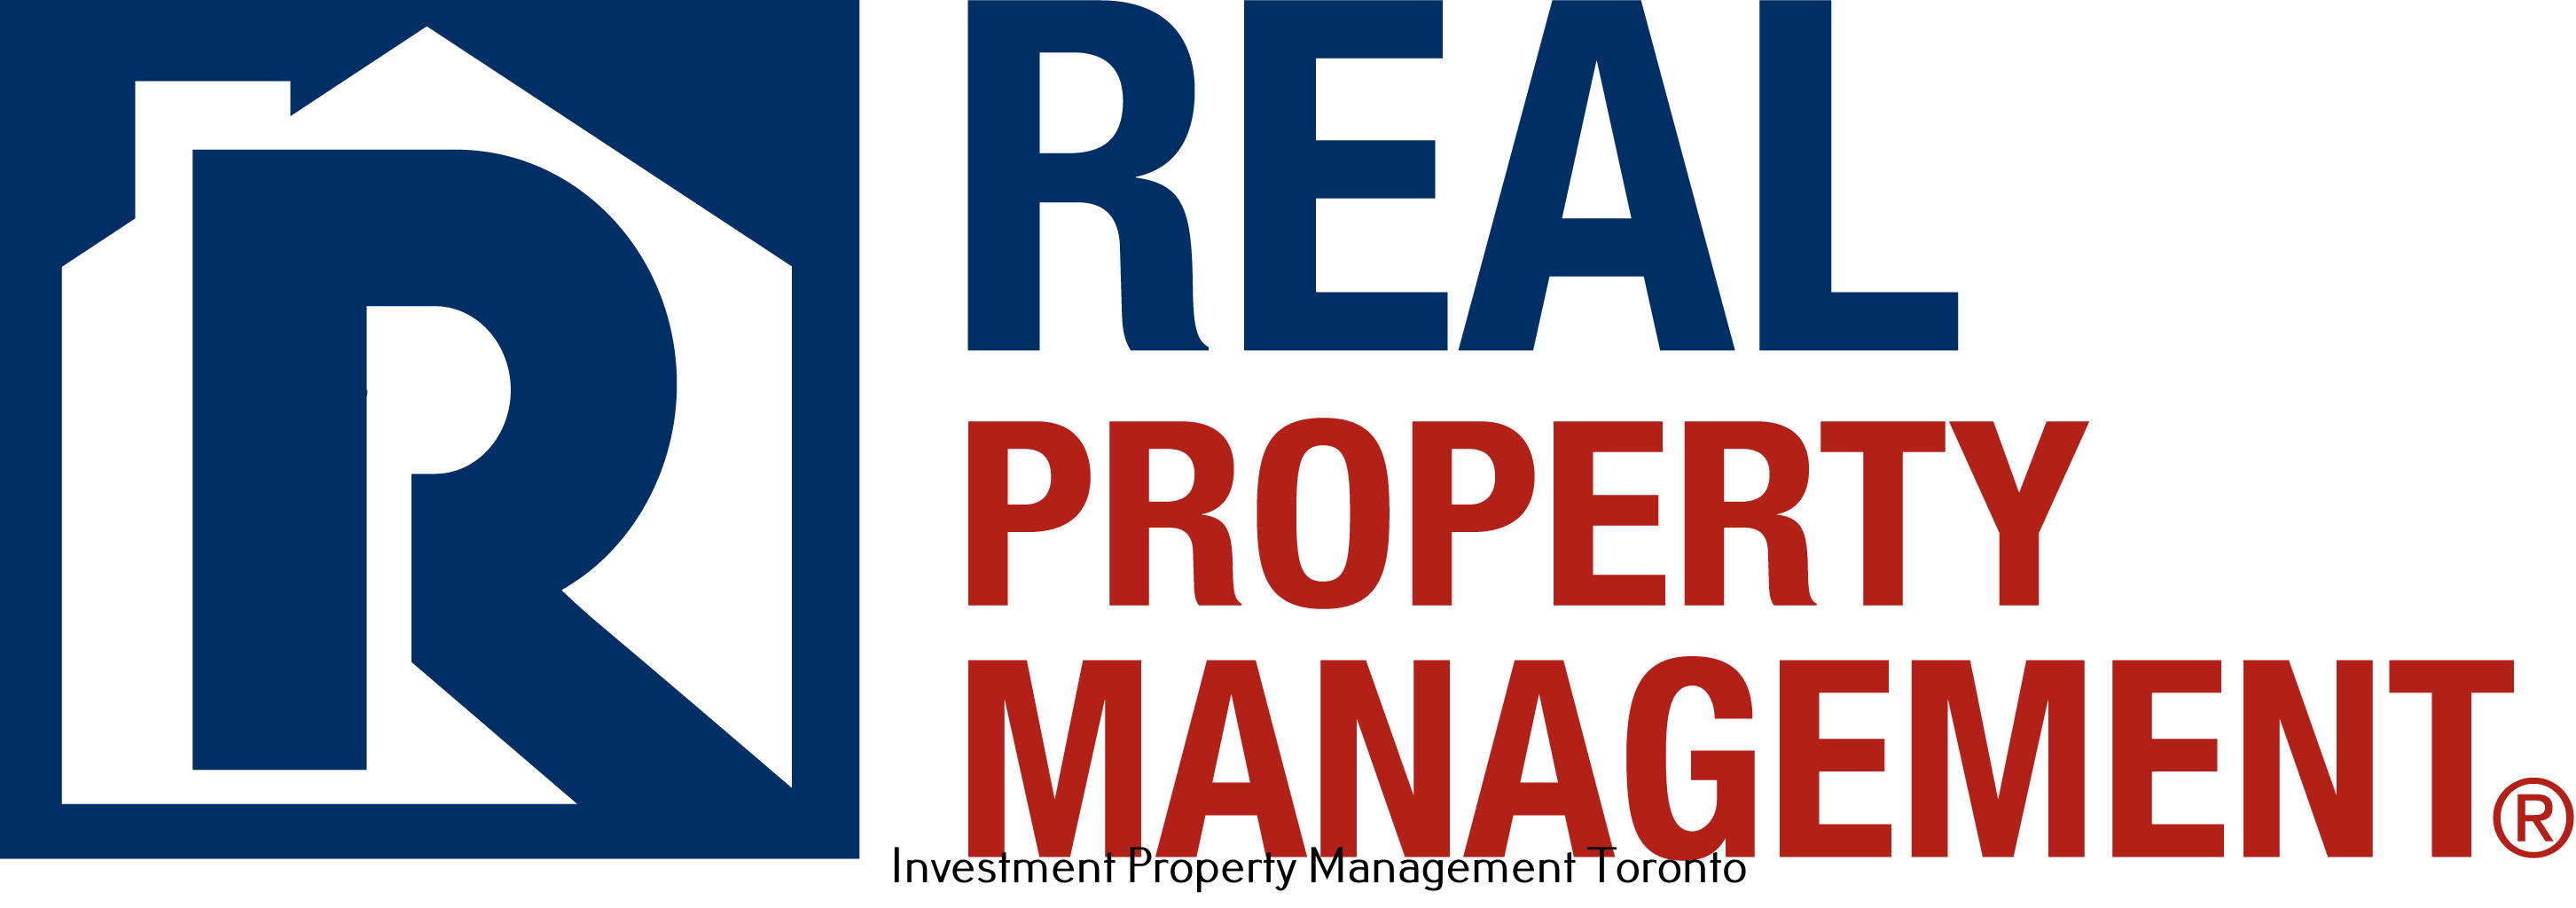 Real Property Management Service Highlights Why Clients Should Choose Them